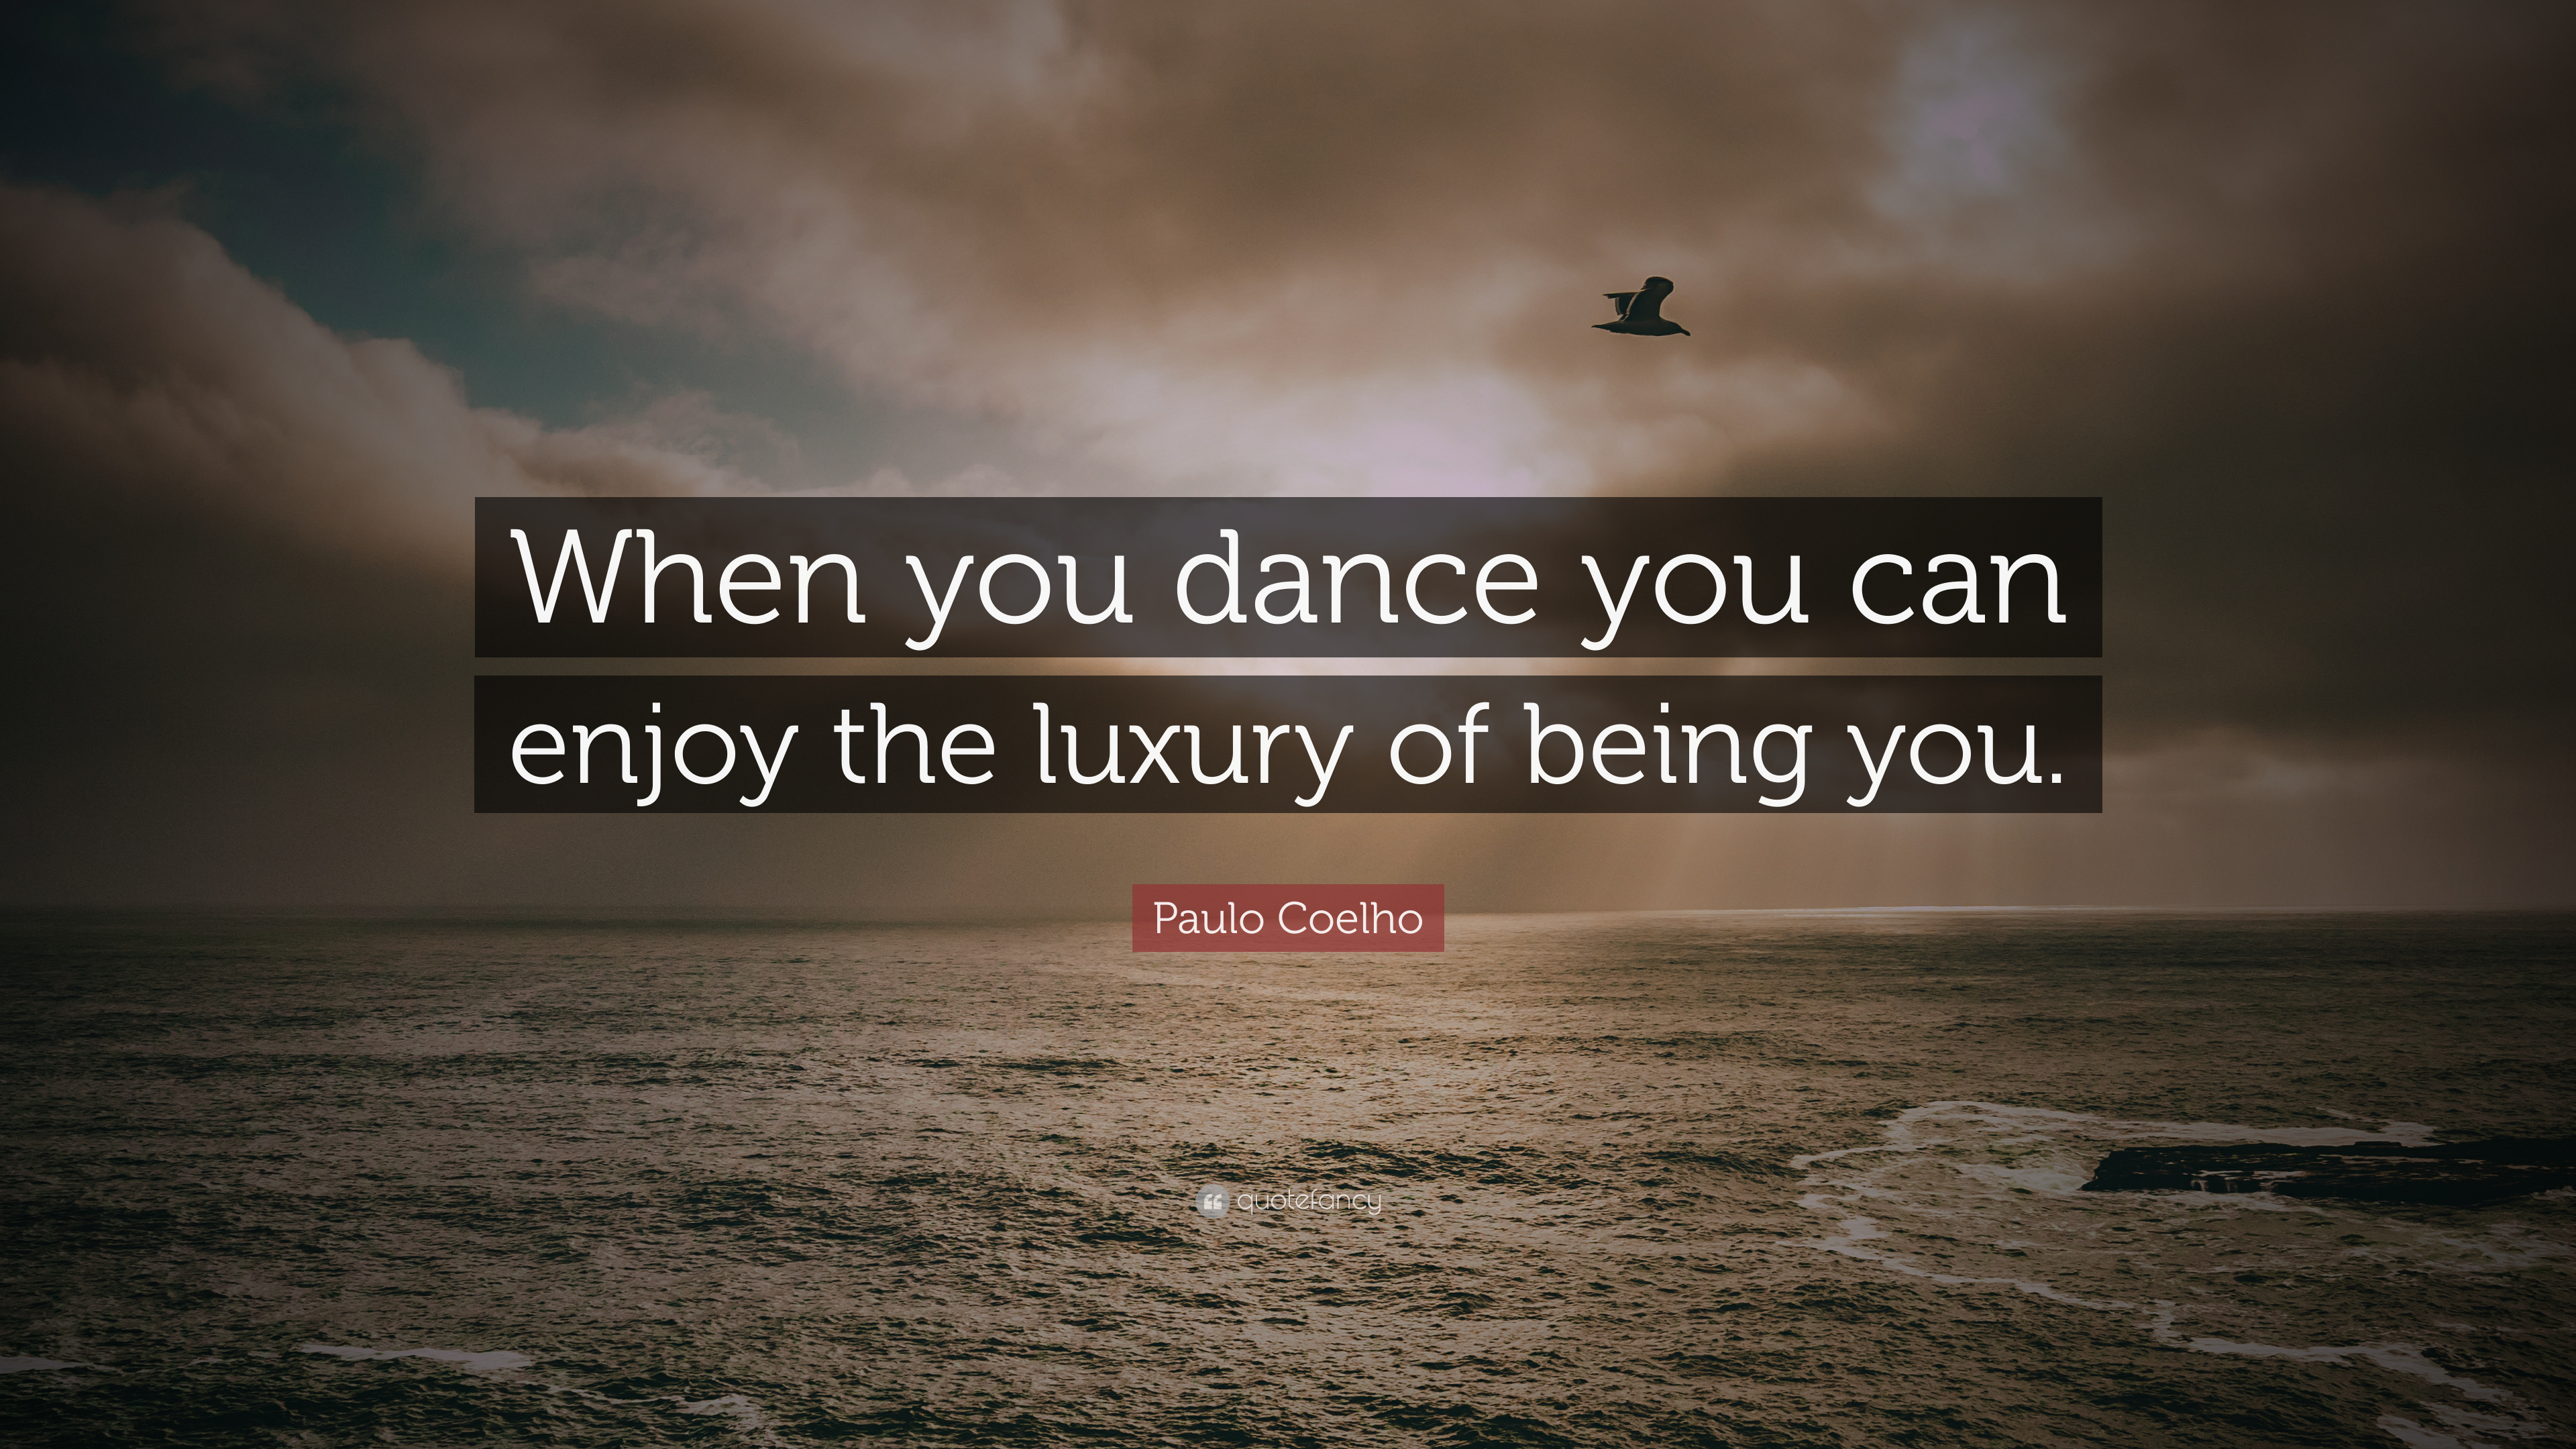 when you dance you can enjoy the luxury of being you. paulo coelho